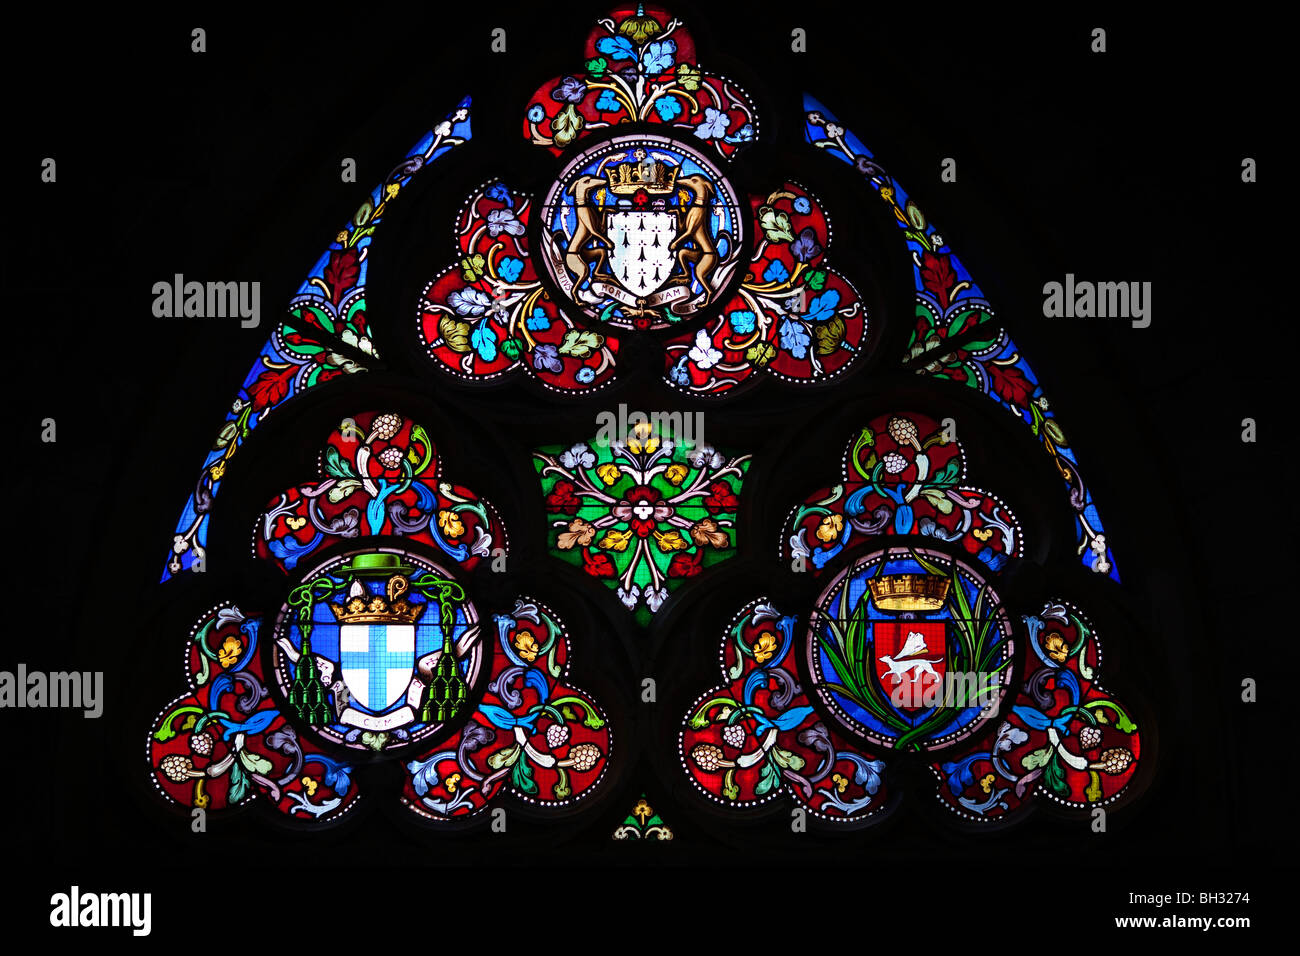 Stained glass window, Saint Pierre Cathedral, Vannes, department of Morbihan, region of Brittany, France Stock Photo